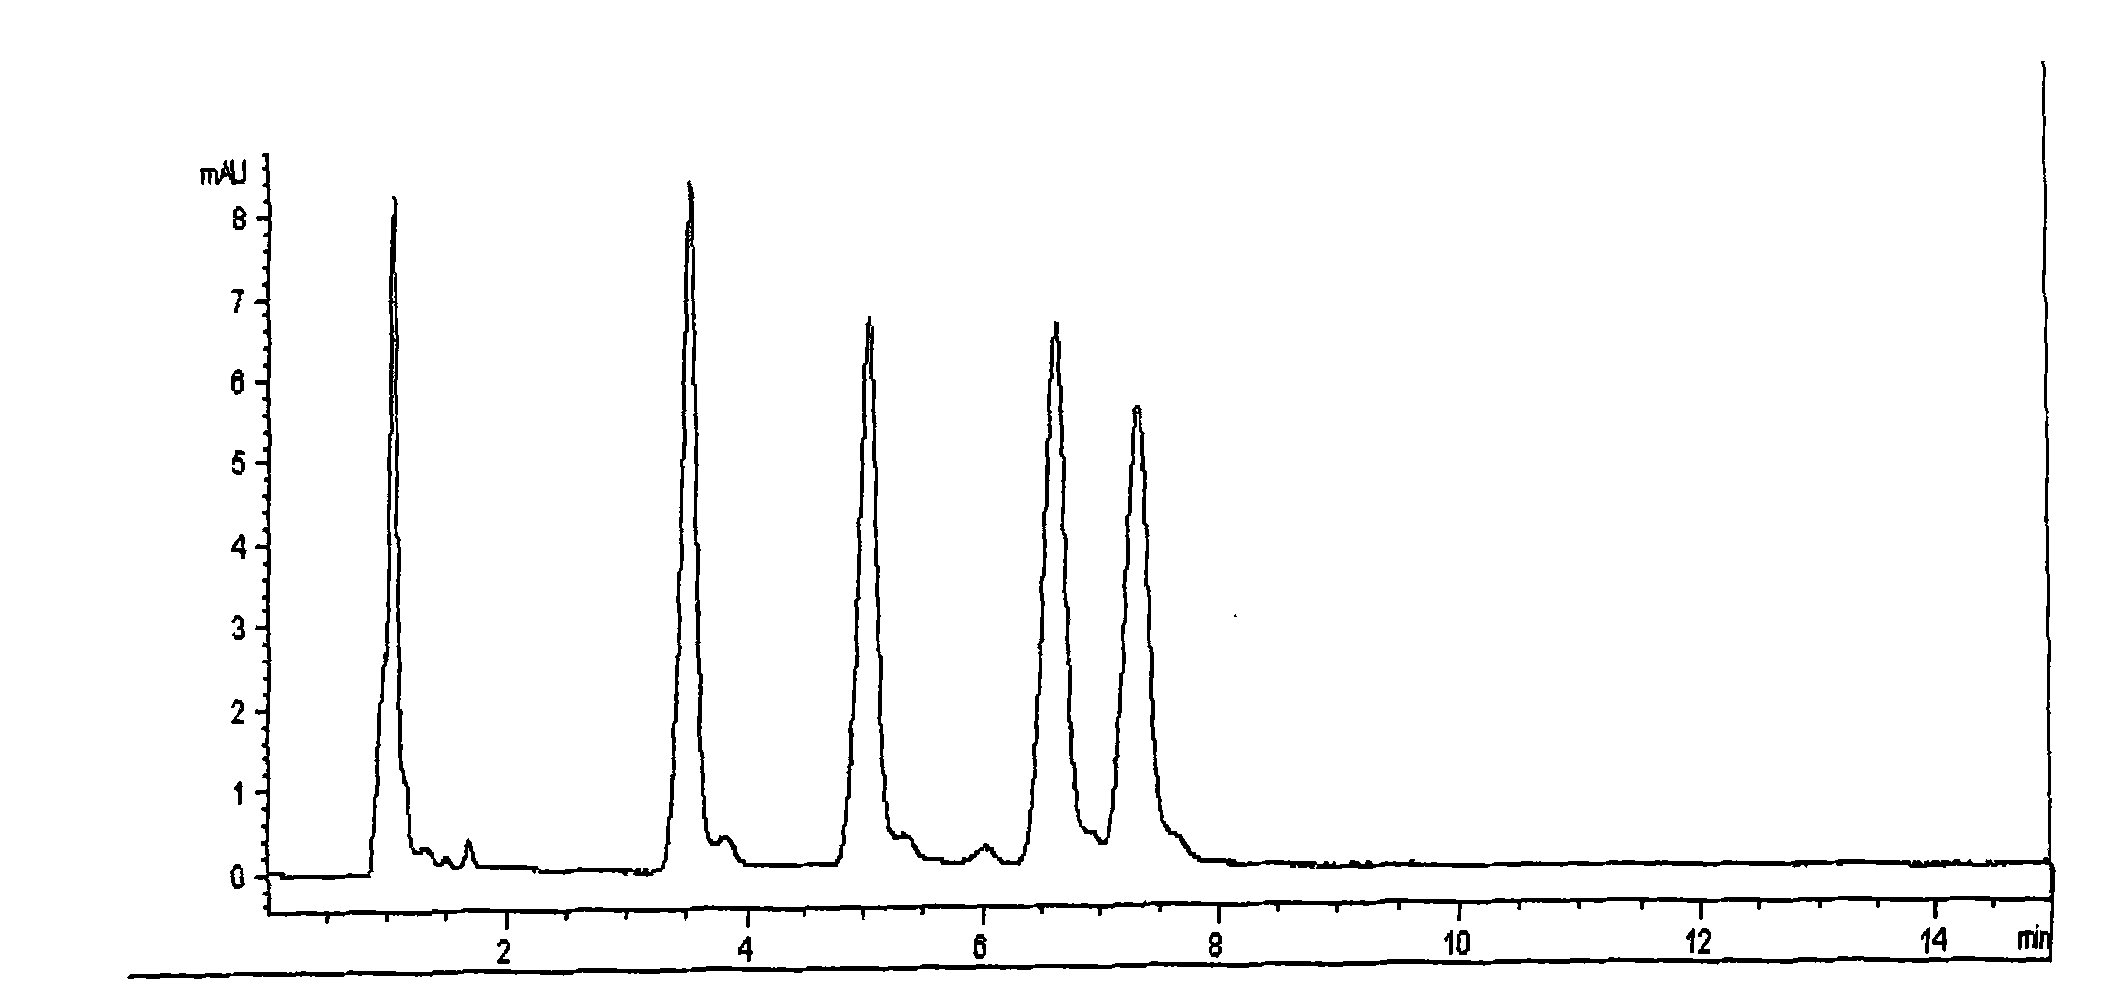 Method for measuring residual quantity of thidiazuron and diuron as well as metabolites thereof in cotton